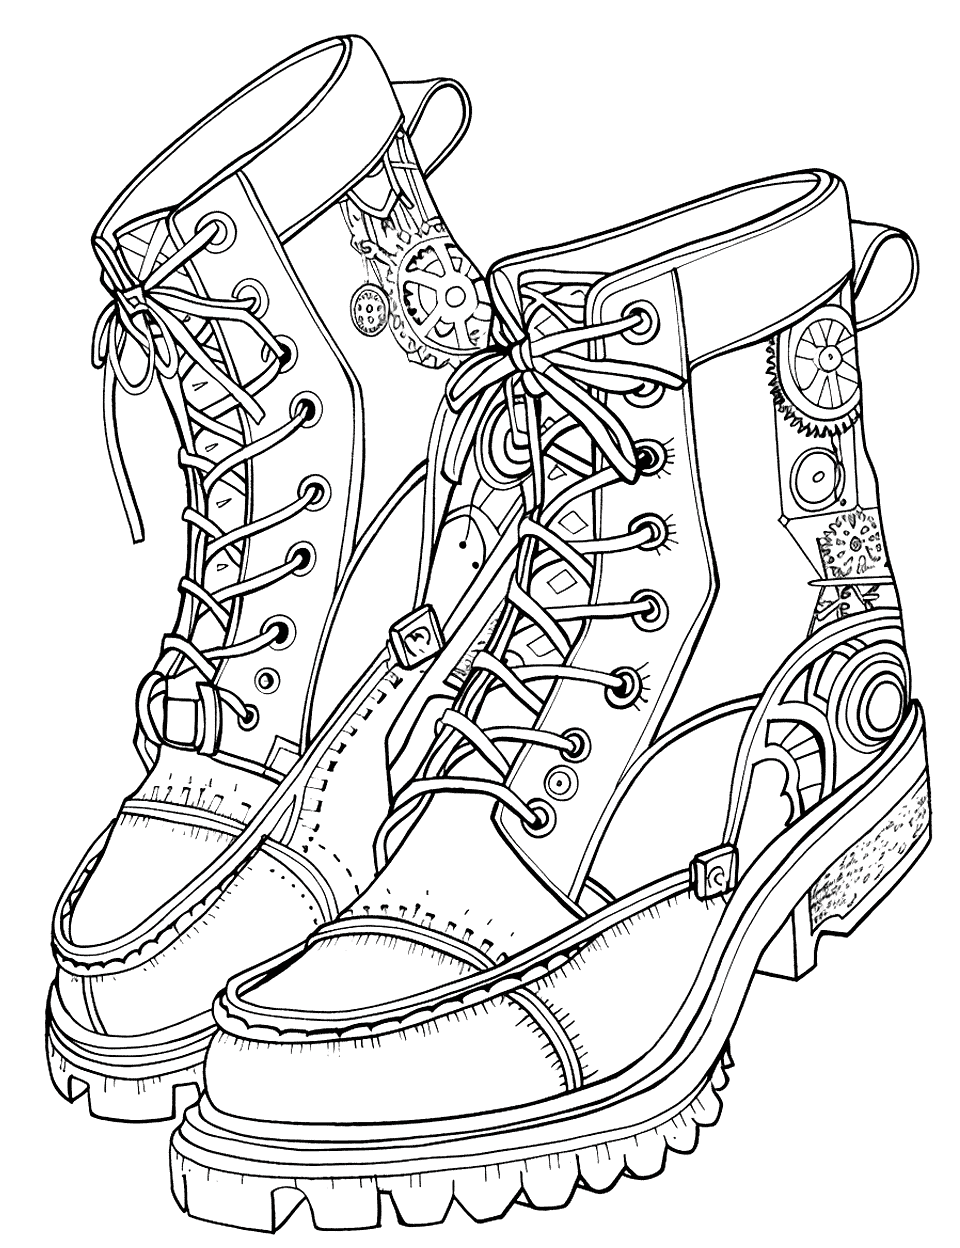 Steampunk Boots Design Shoe Coloring Page - Intricate steampunk boot Design with gears and other elements.